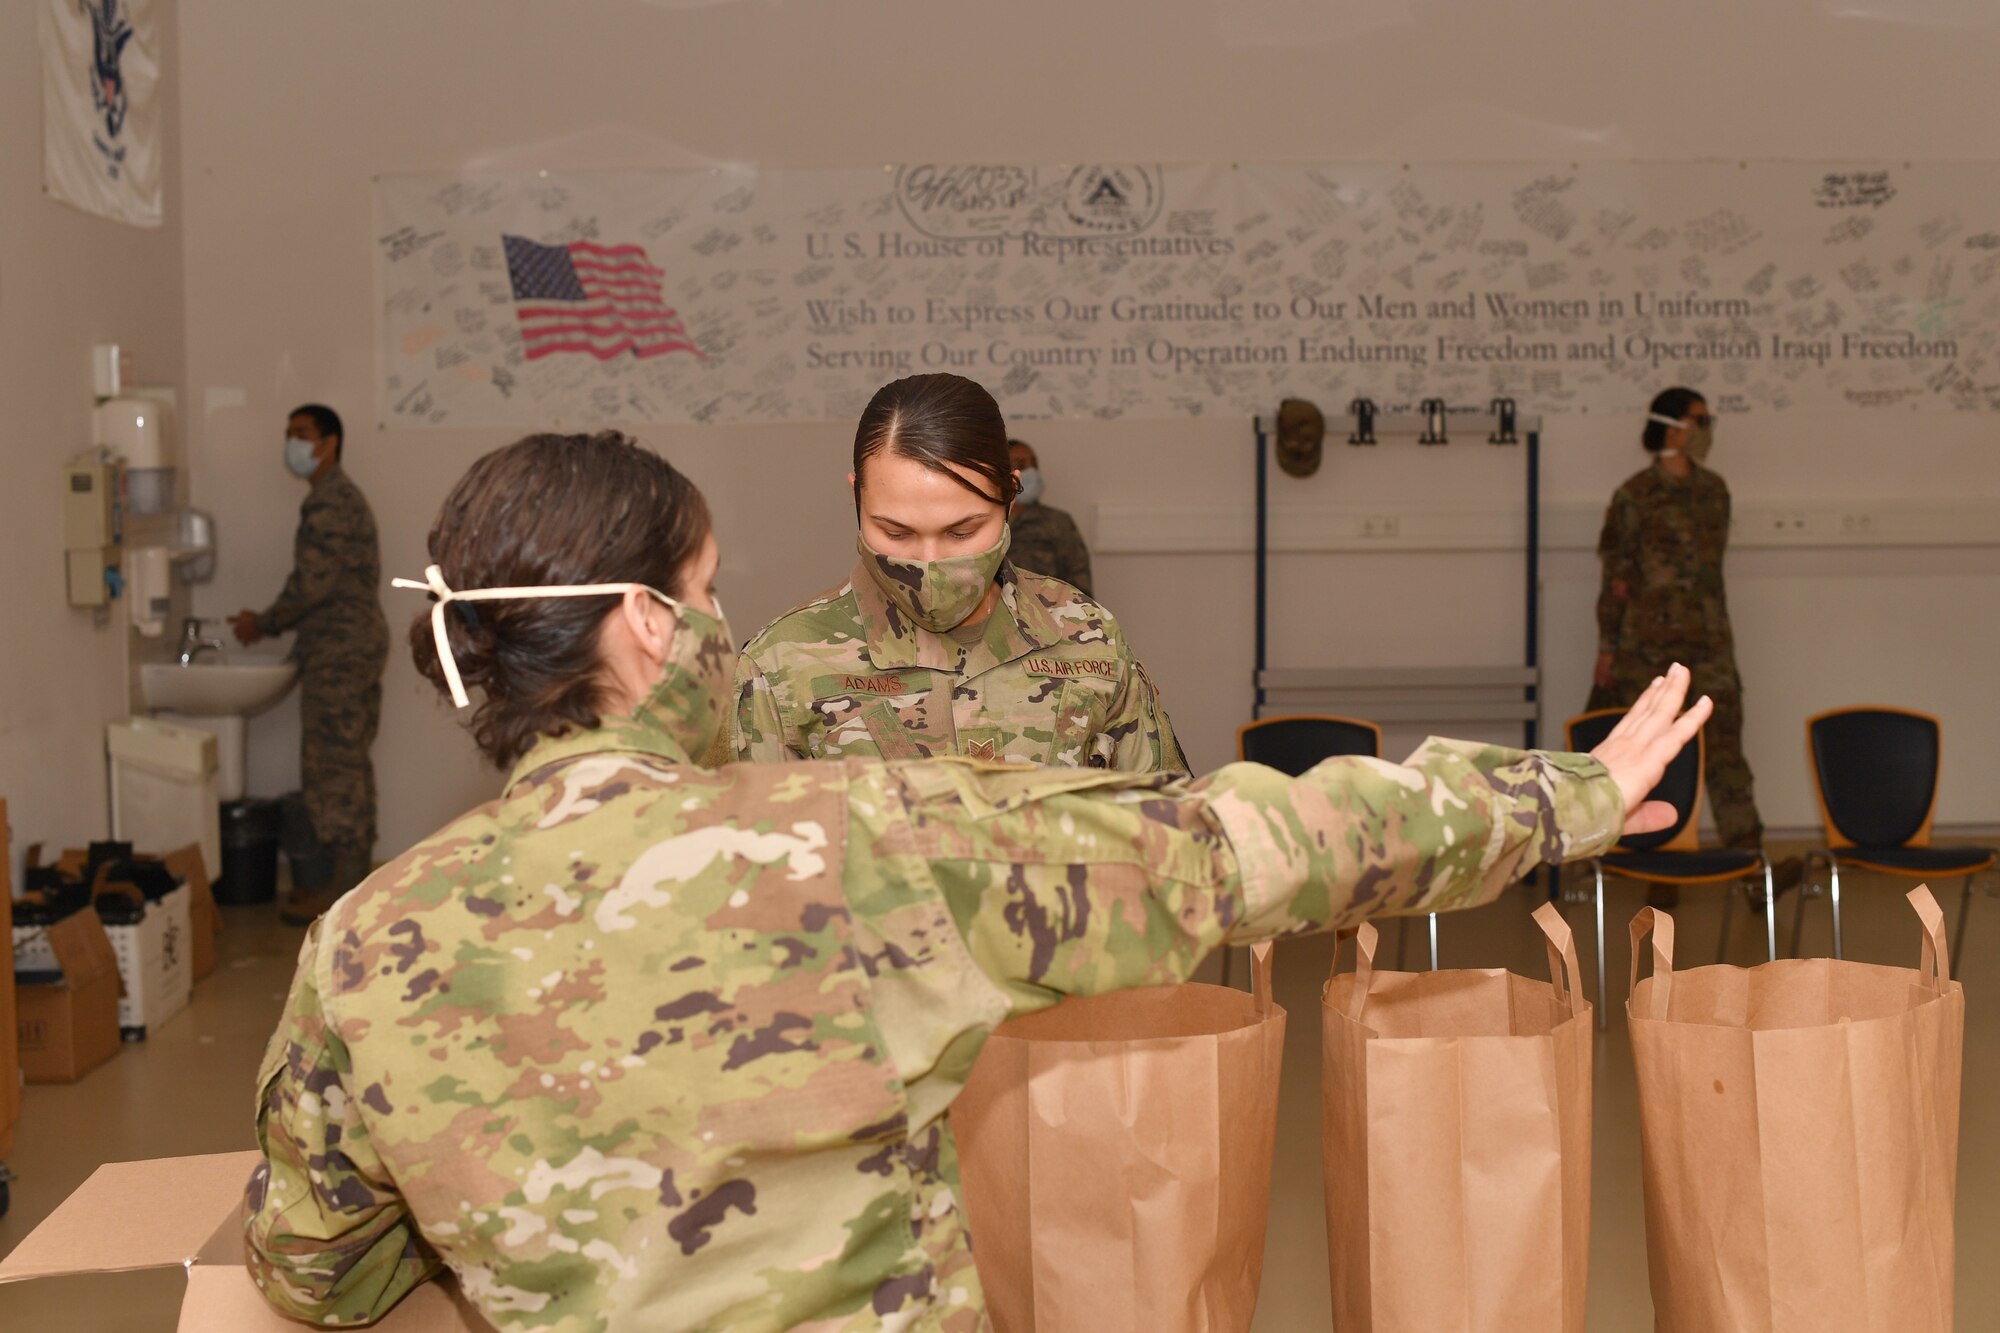 An Airman directs another Airman down a line of to-go meals, while others stand in line and wash their hands.